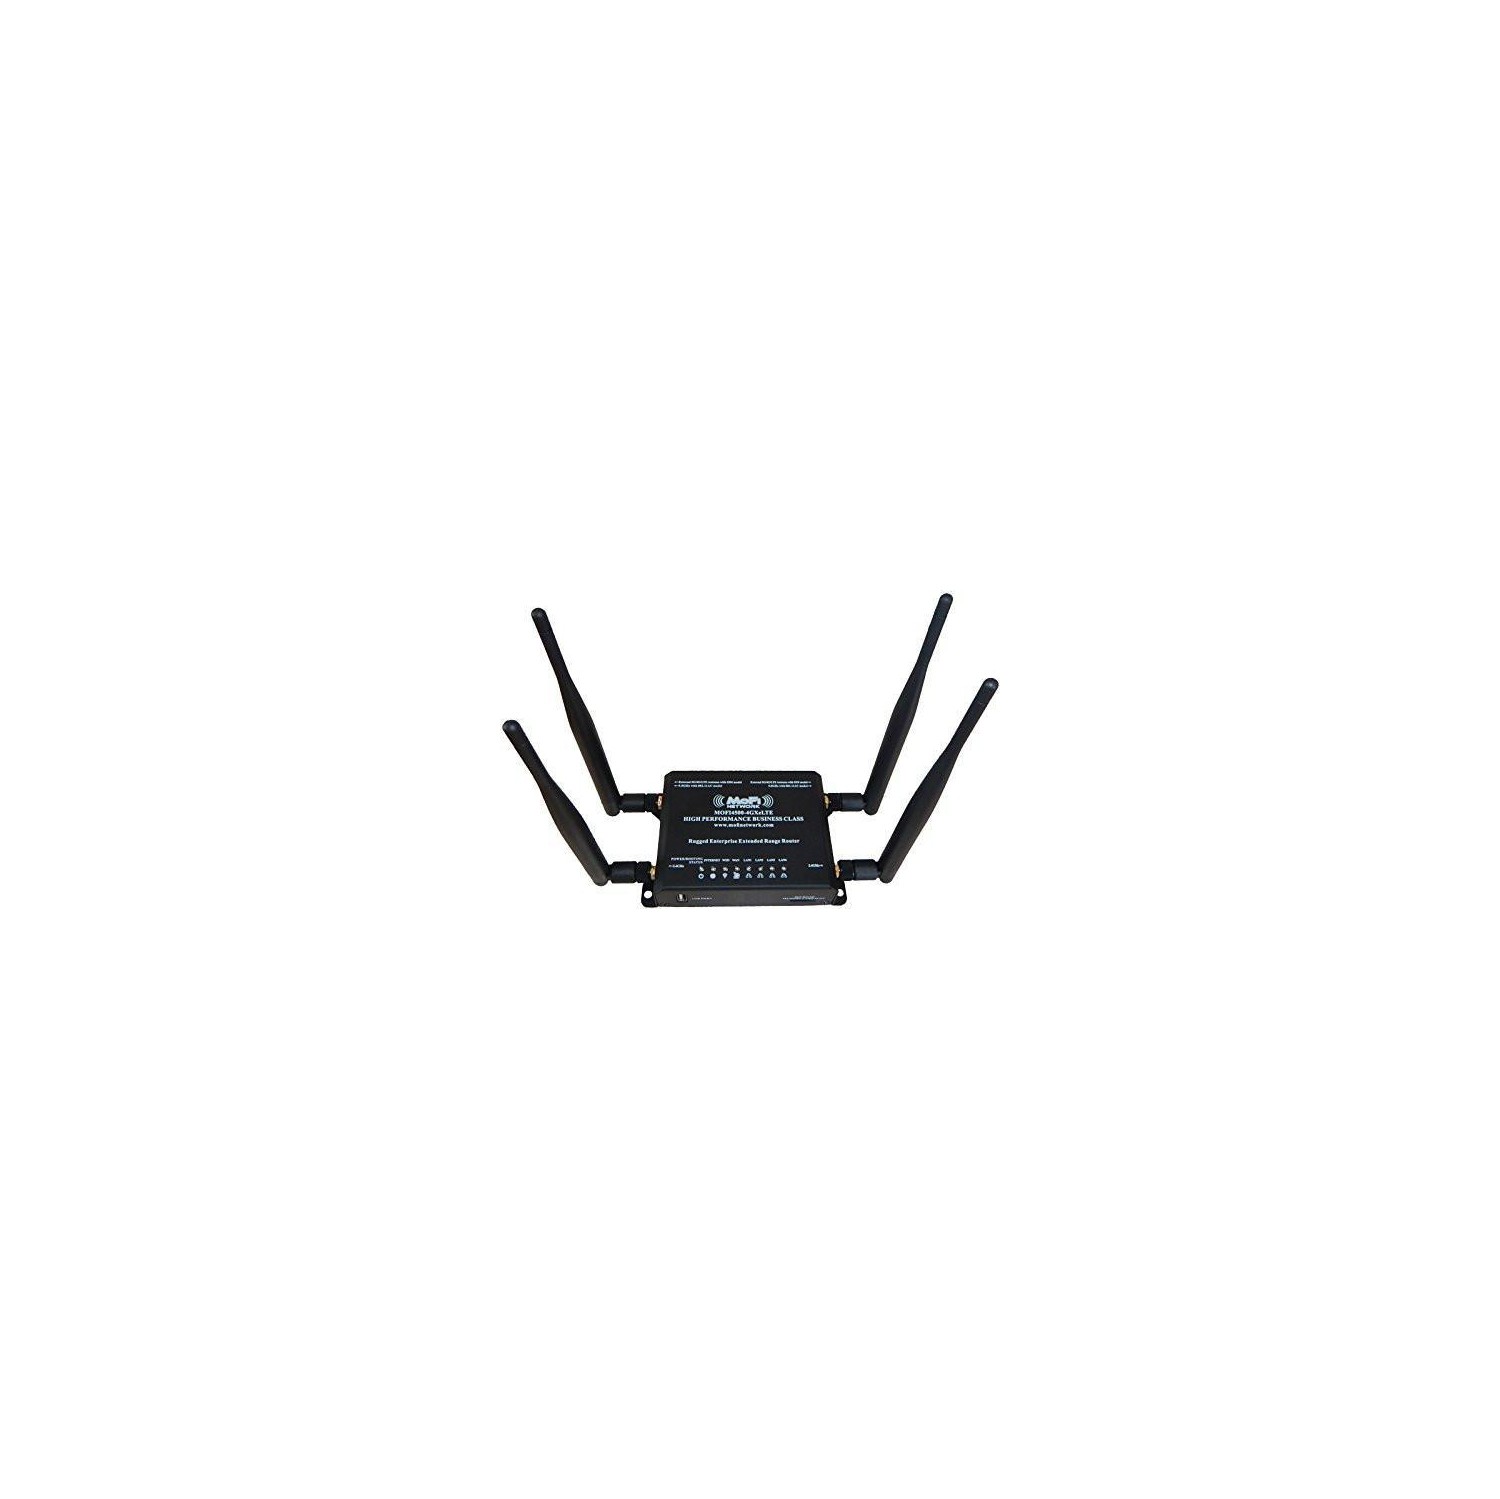 MOFI4500-4GXeLTE-SIM4-COMBO V3 4G/LTE Router with Included SIM Card Slot - NEW Version 3